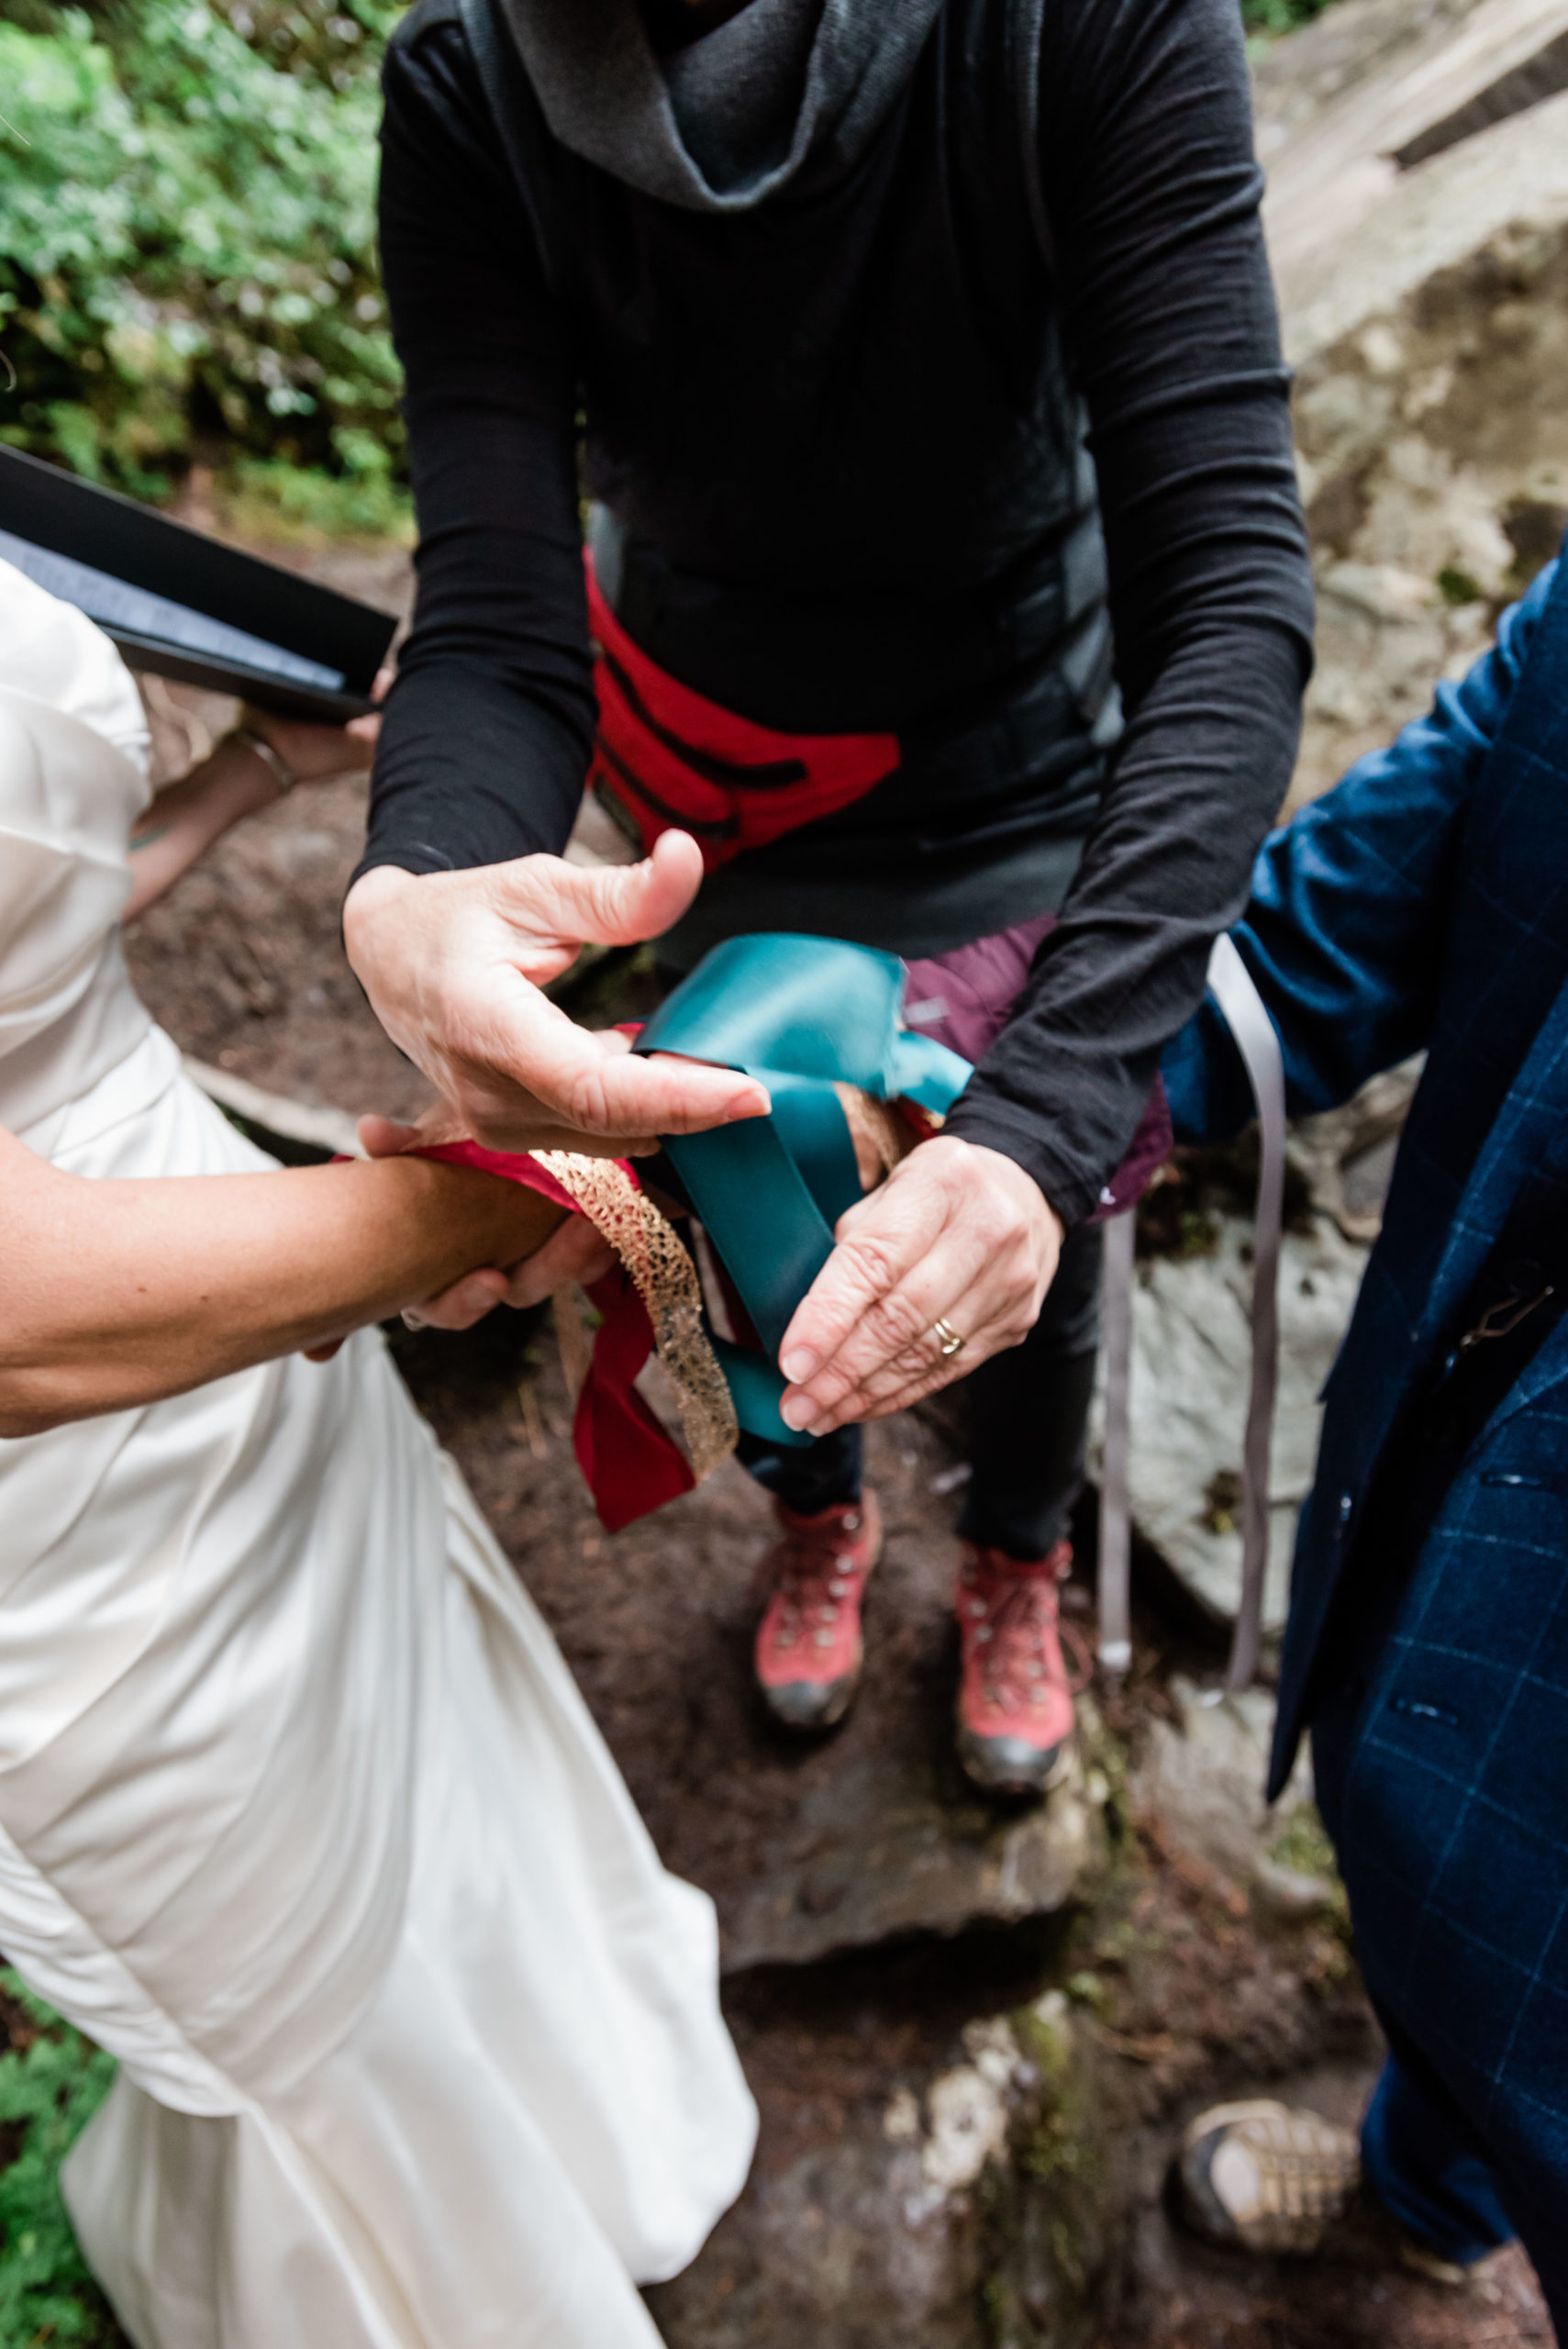 Elopement ceremonies can include lots of ideas. This one had a hand-fasting knotting ceremony with a teal ribbon as seen in this image.